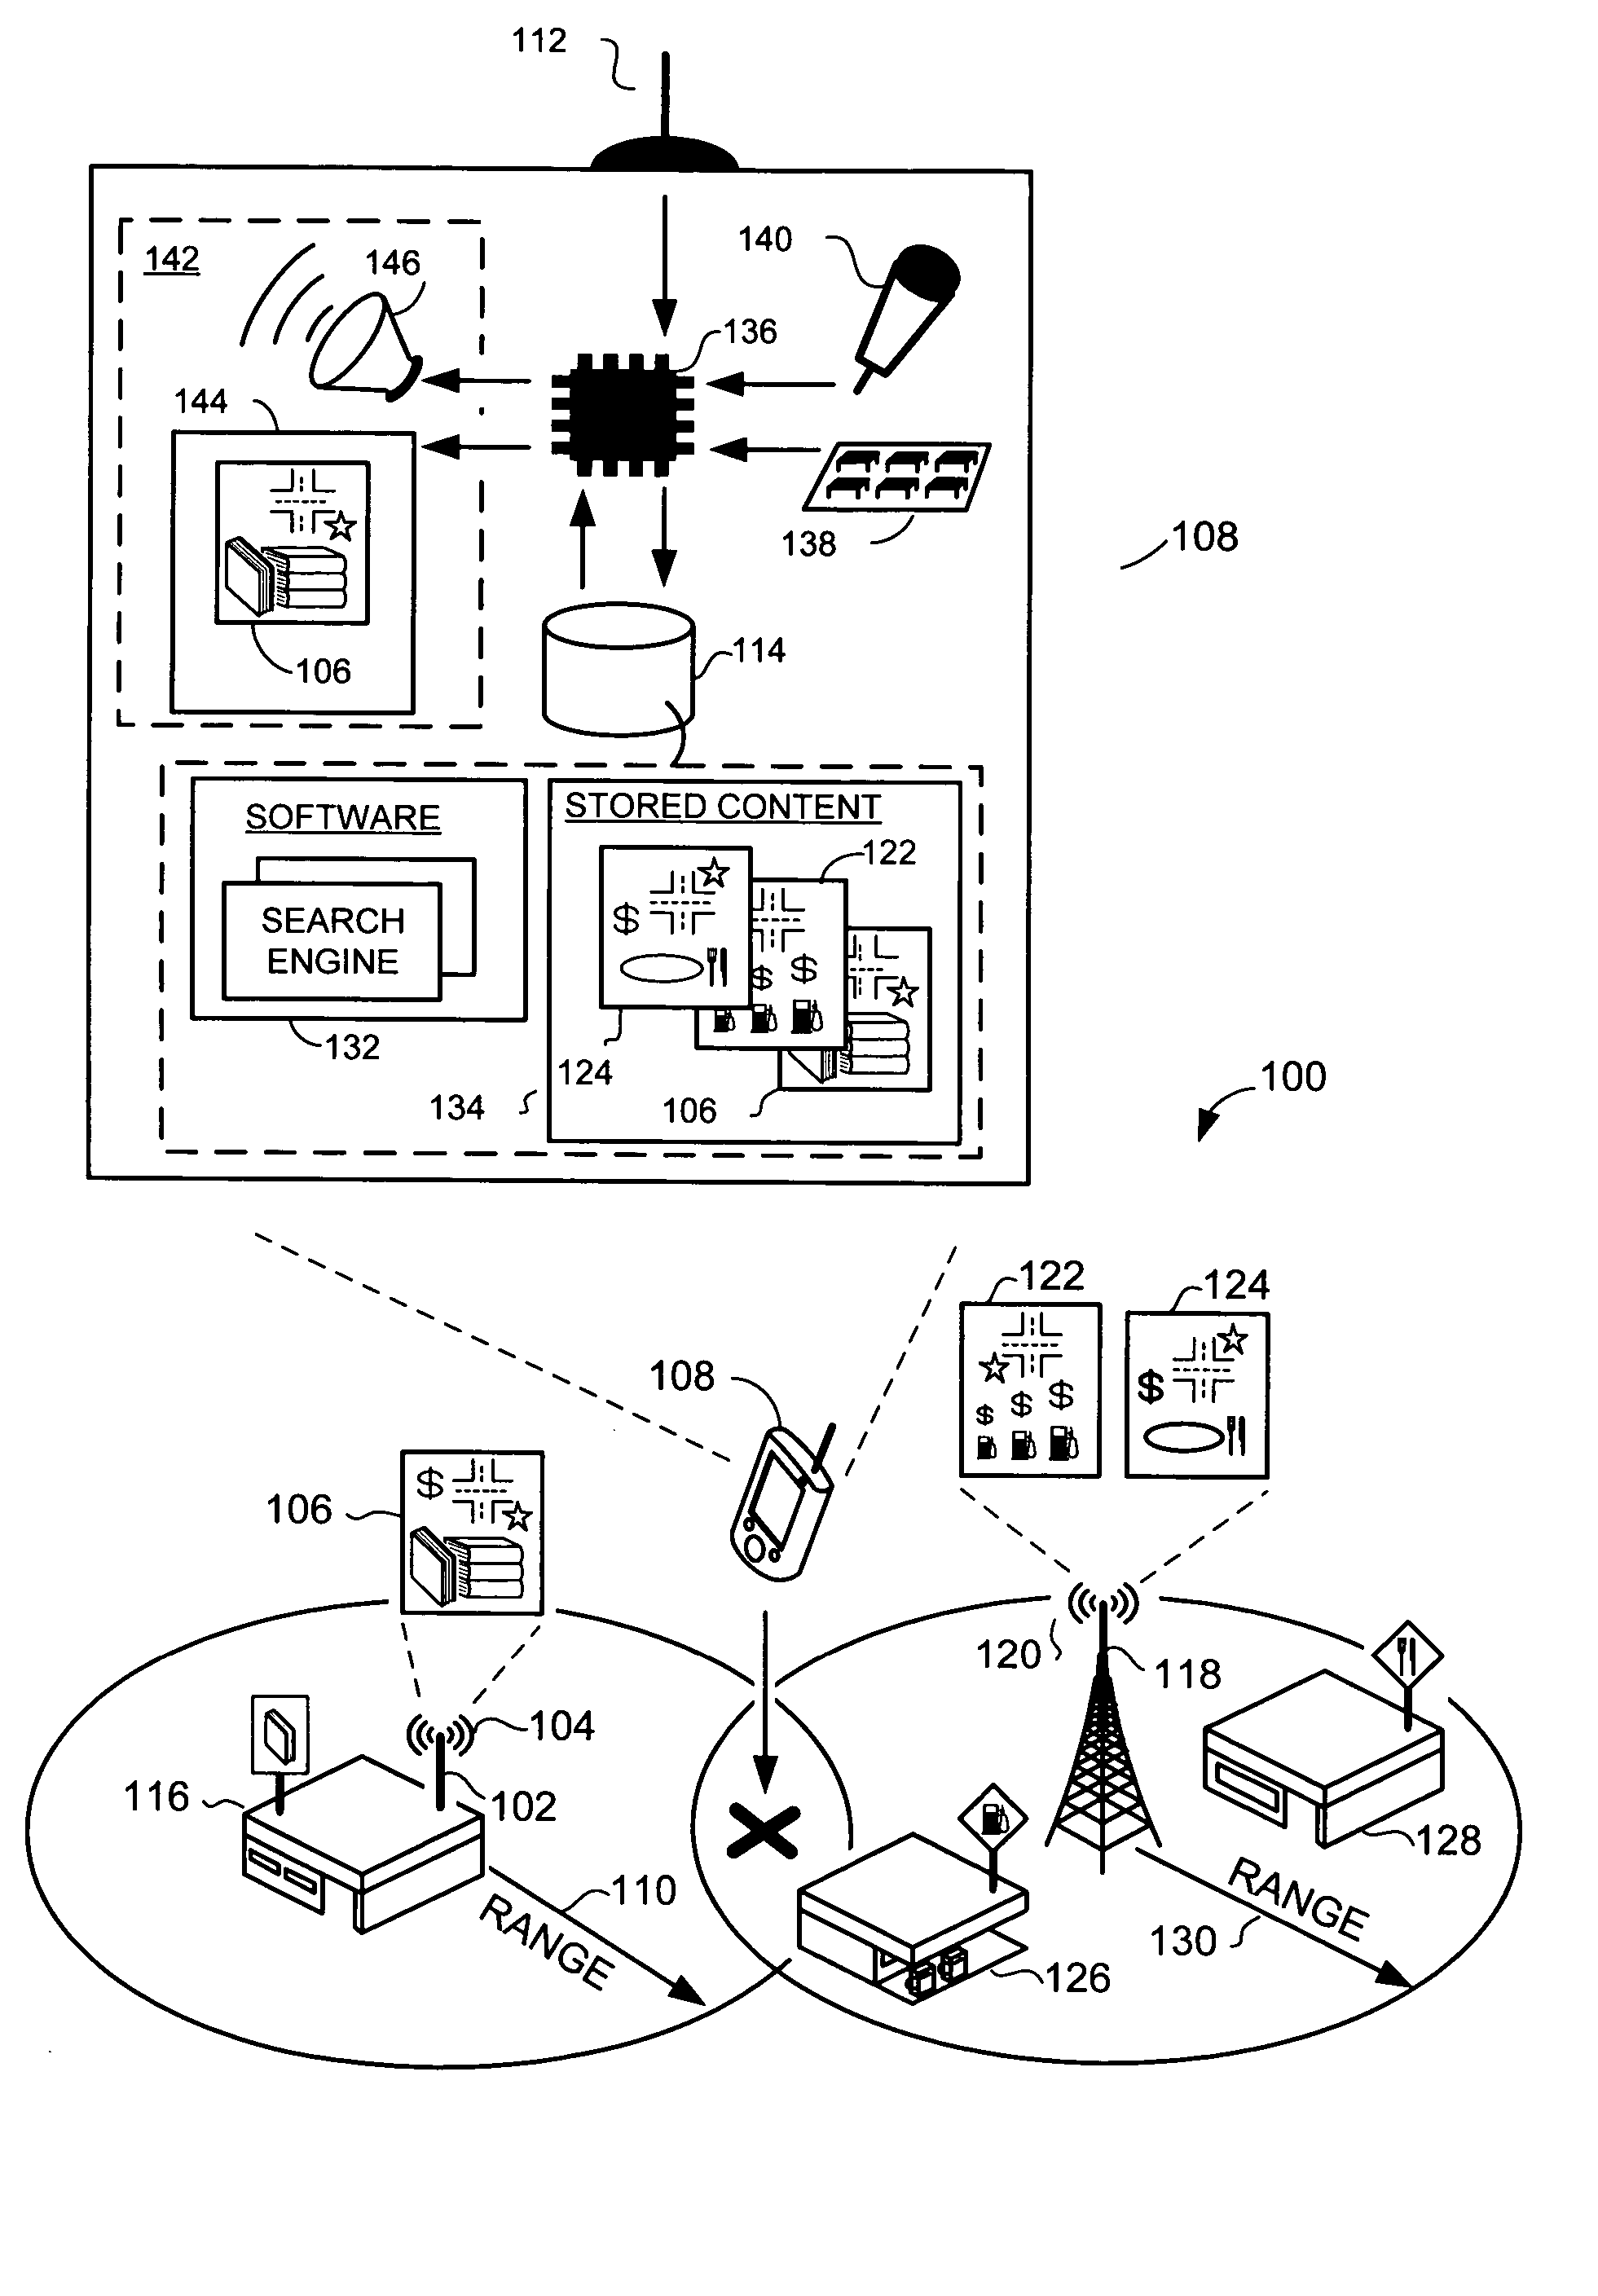 Selectively storing broadcast in mobile device